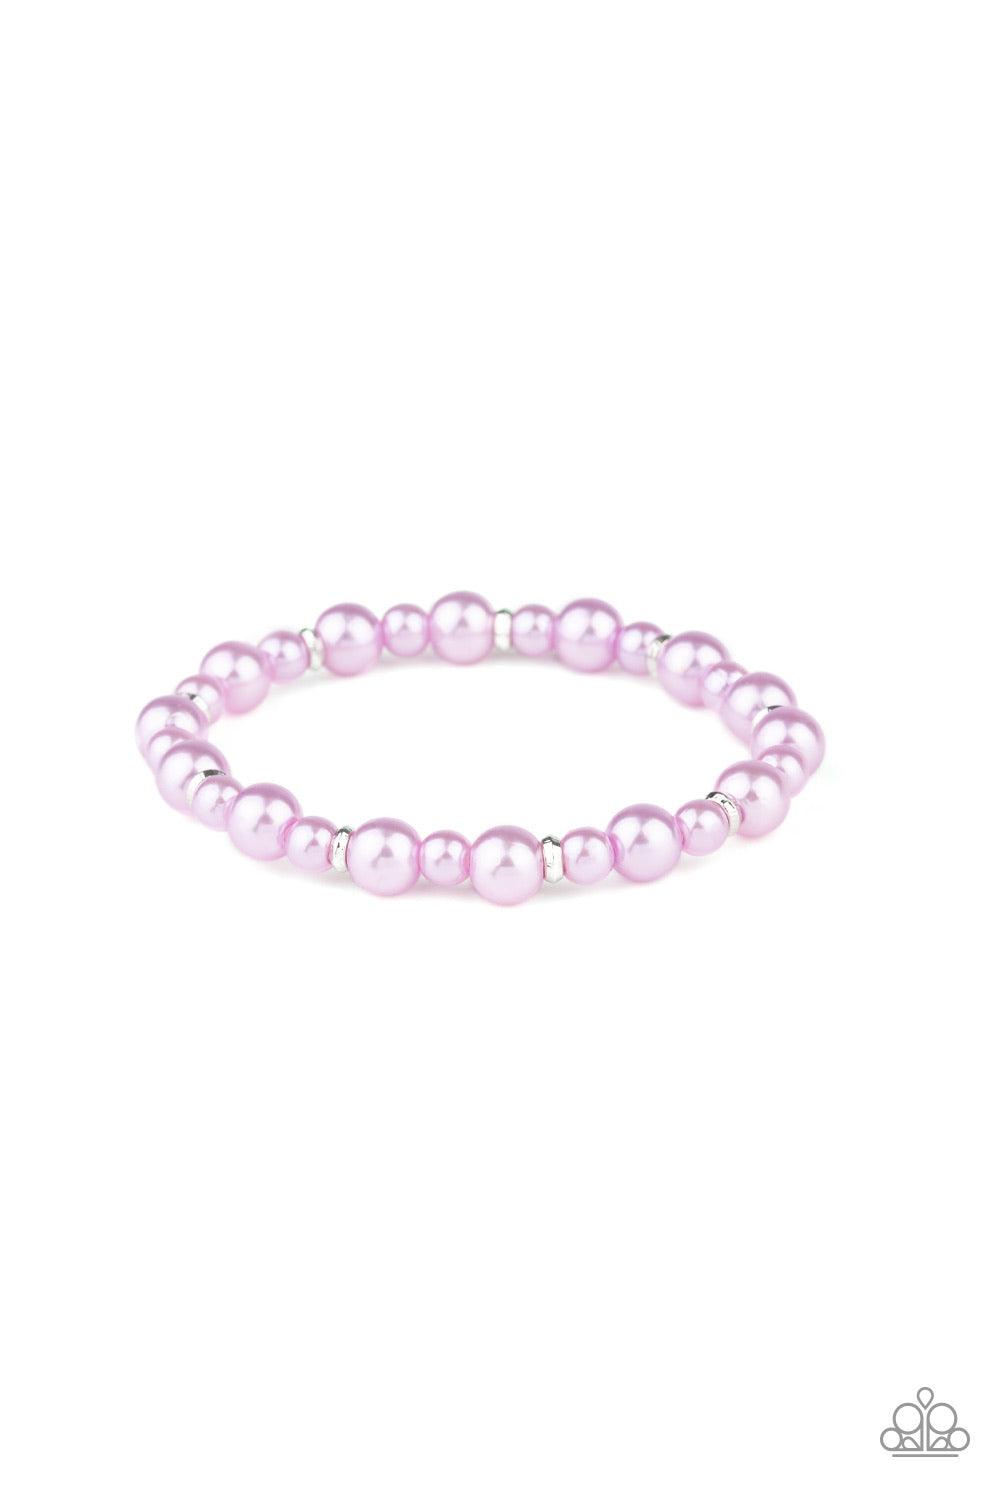 Paparazzi Accessories Powder and Pearls - Purple Infused with dainty silver accents, a collection of dainty and classic purple pearls are threaded along a stretchy band around the wrist for a timeless look. Jewelry